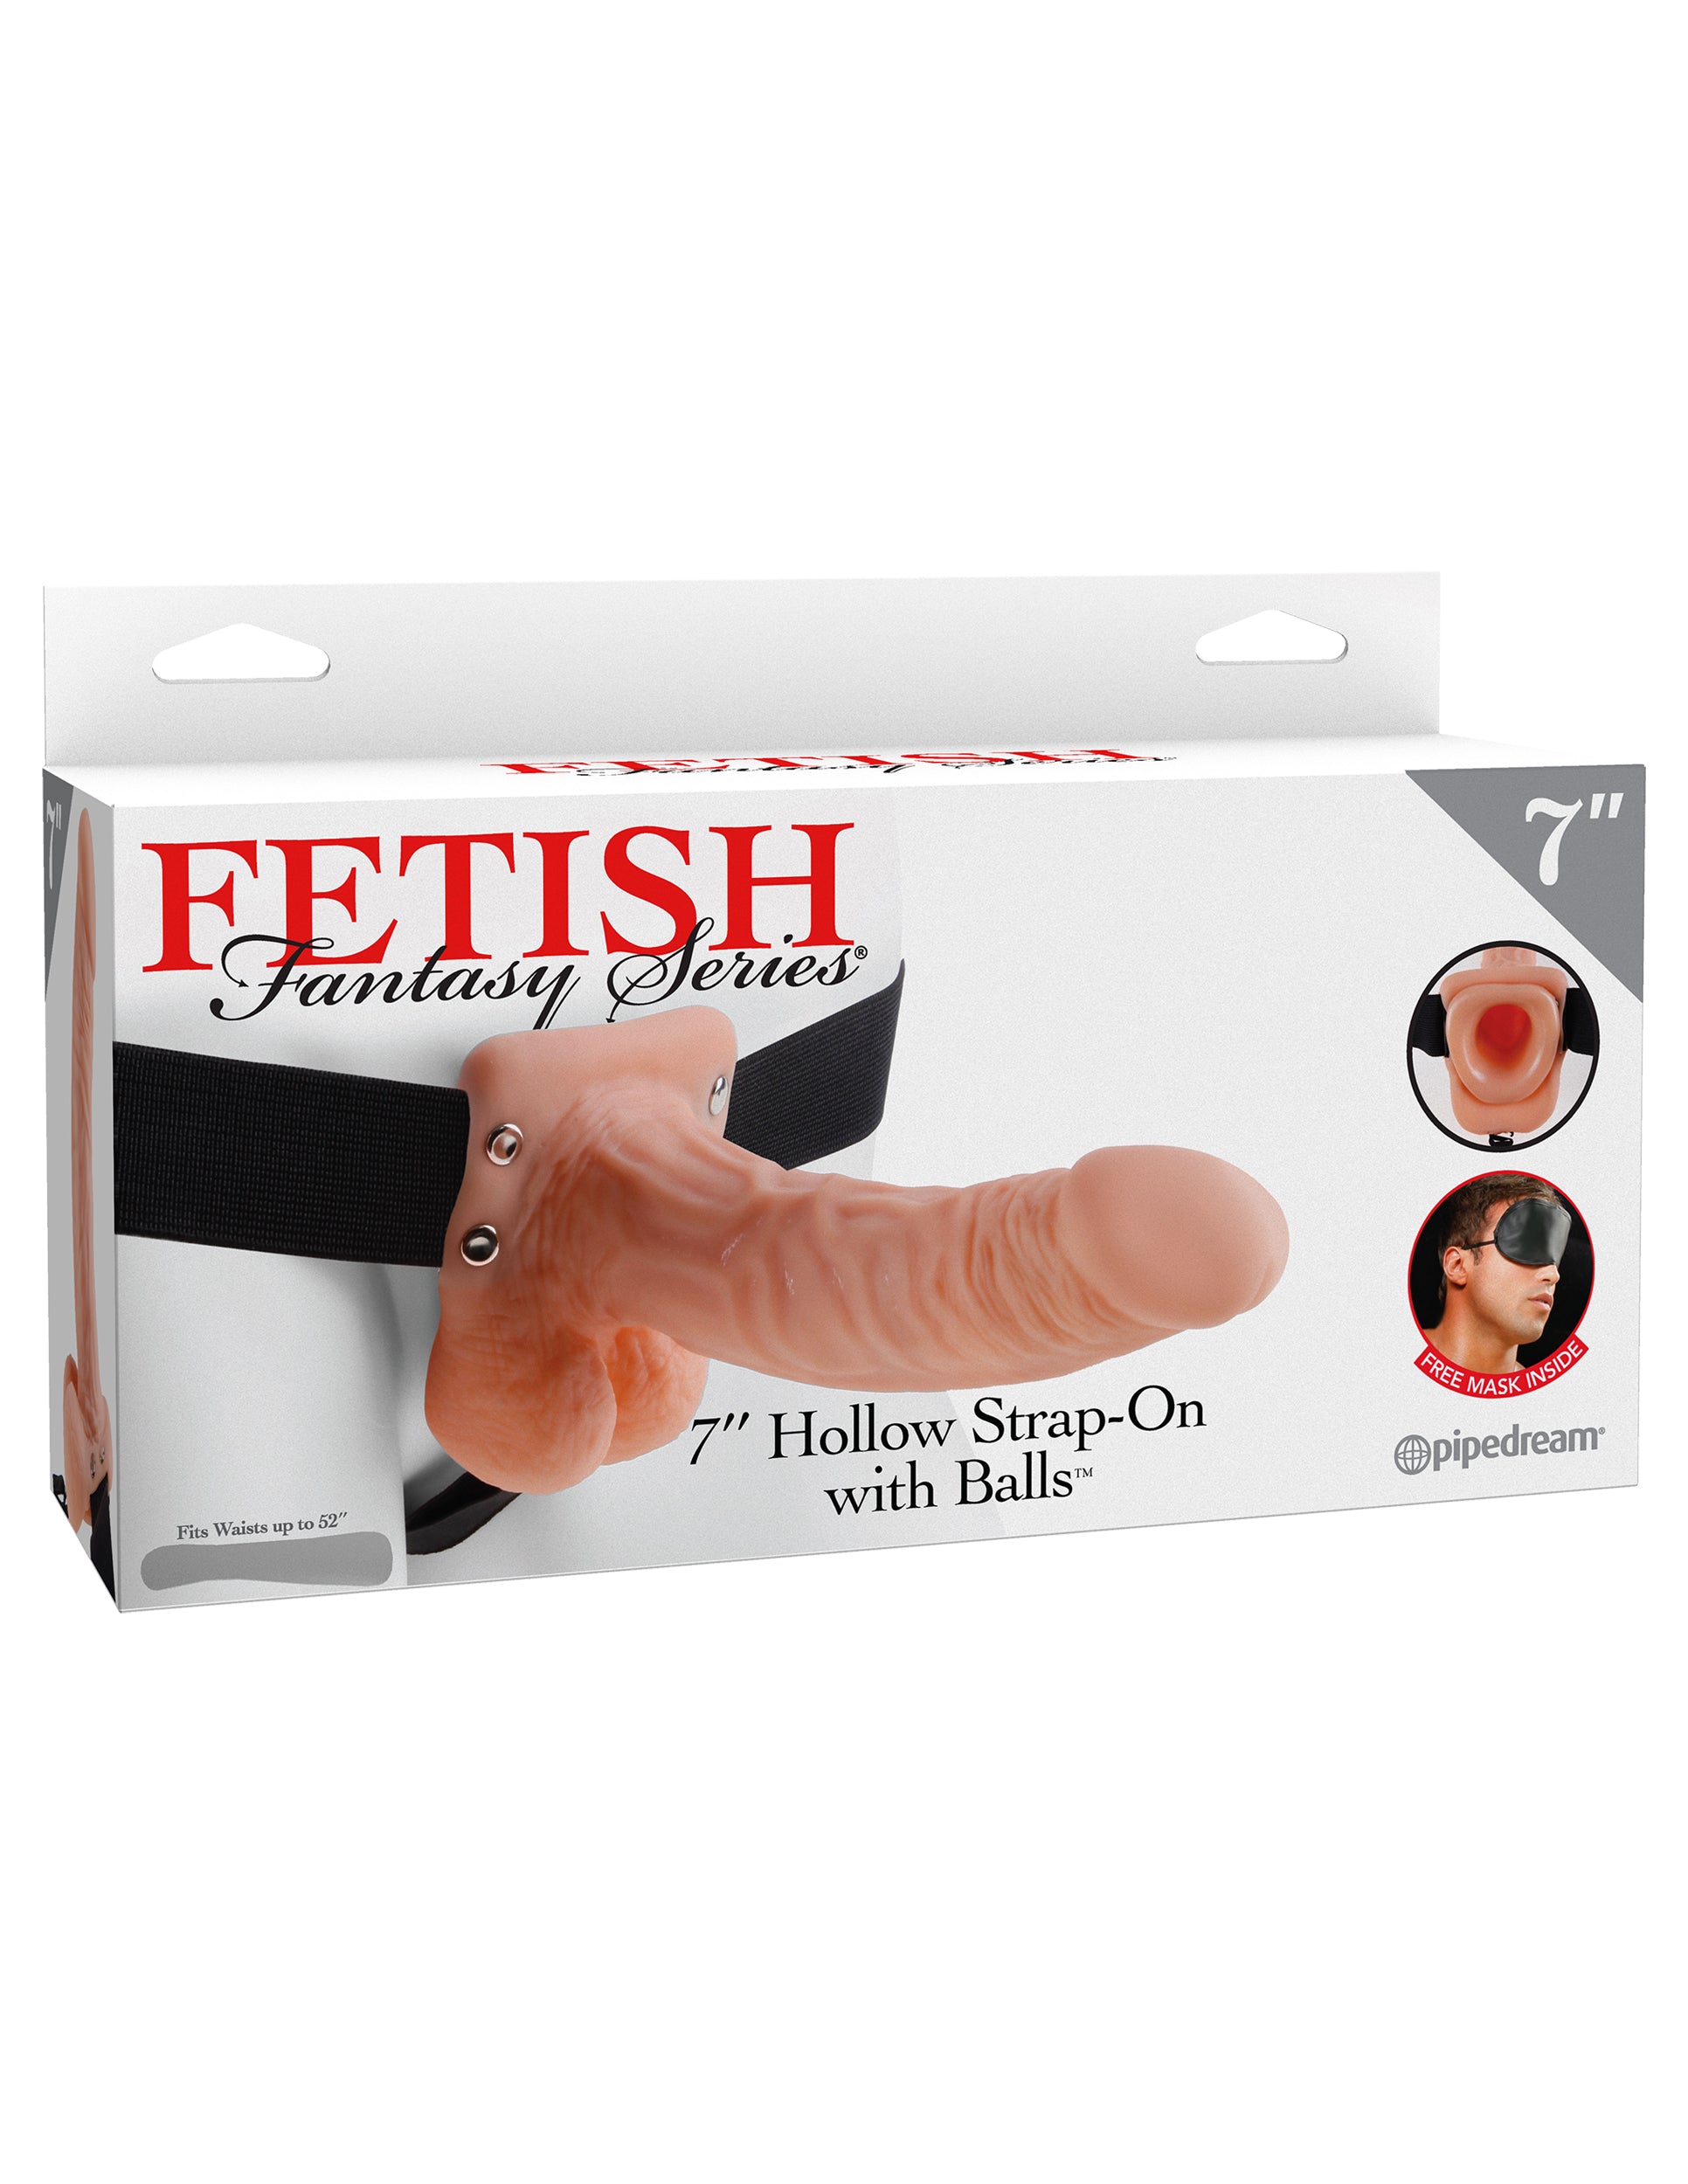 Fetish Fantasy Series 7 Inch Hollow Strap-on With Balls - Flesh *